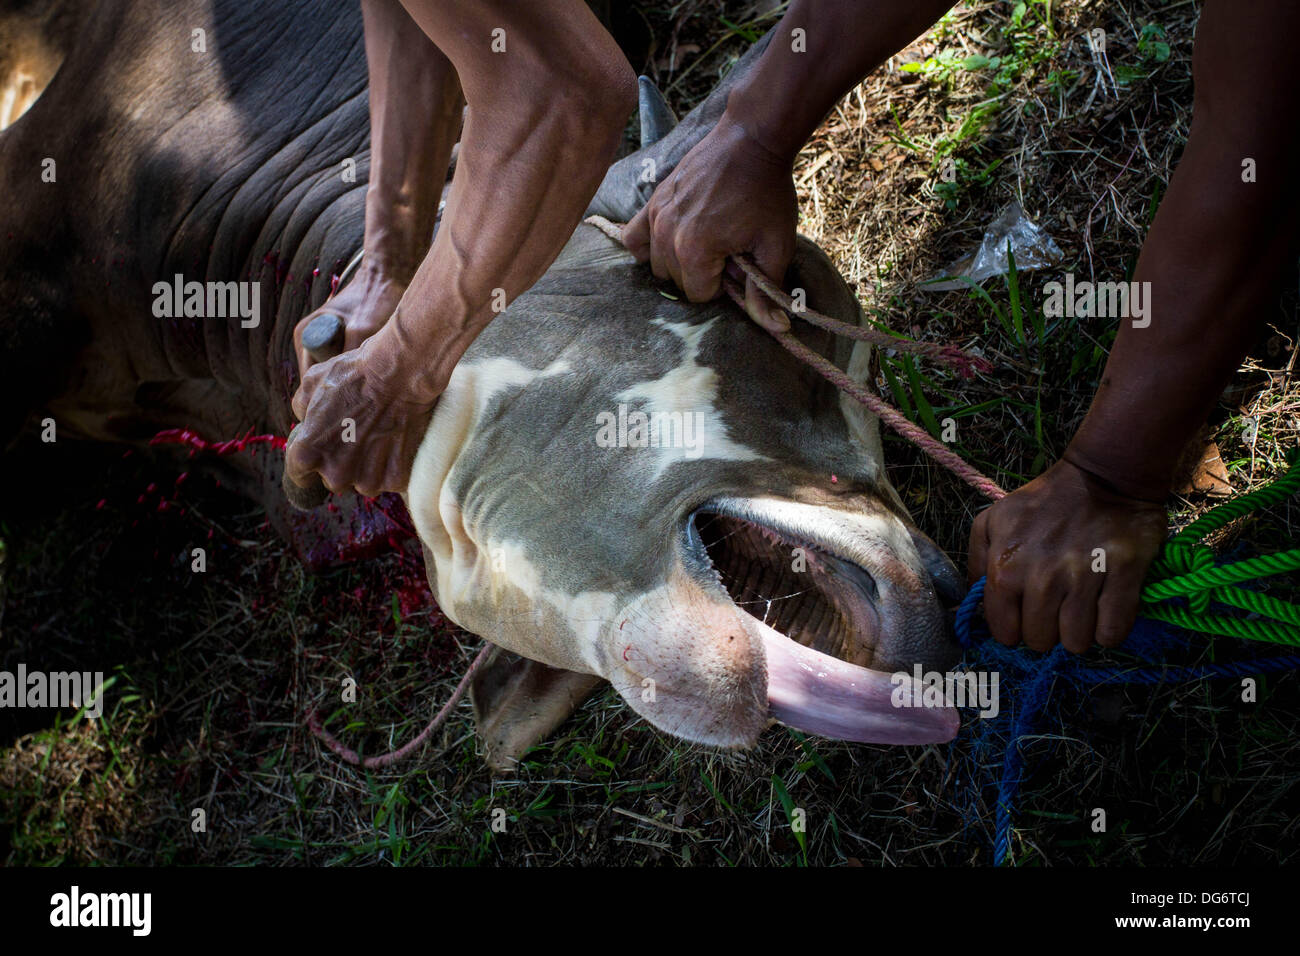 Serpong-Banten, Indonesia. 15th October 2013. A Cow slit on the throat. Muslims in Indonesia celebrate Iedul Adha by slaughtering cows or sheep to give to the poor.  Credit:  Donal Husni/Alamy Live News Stock Photo